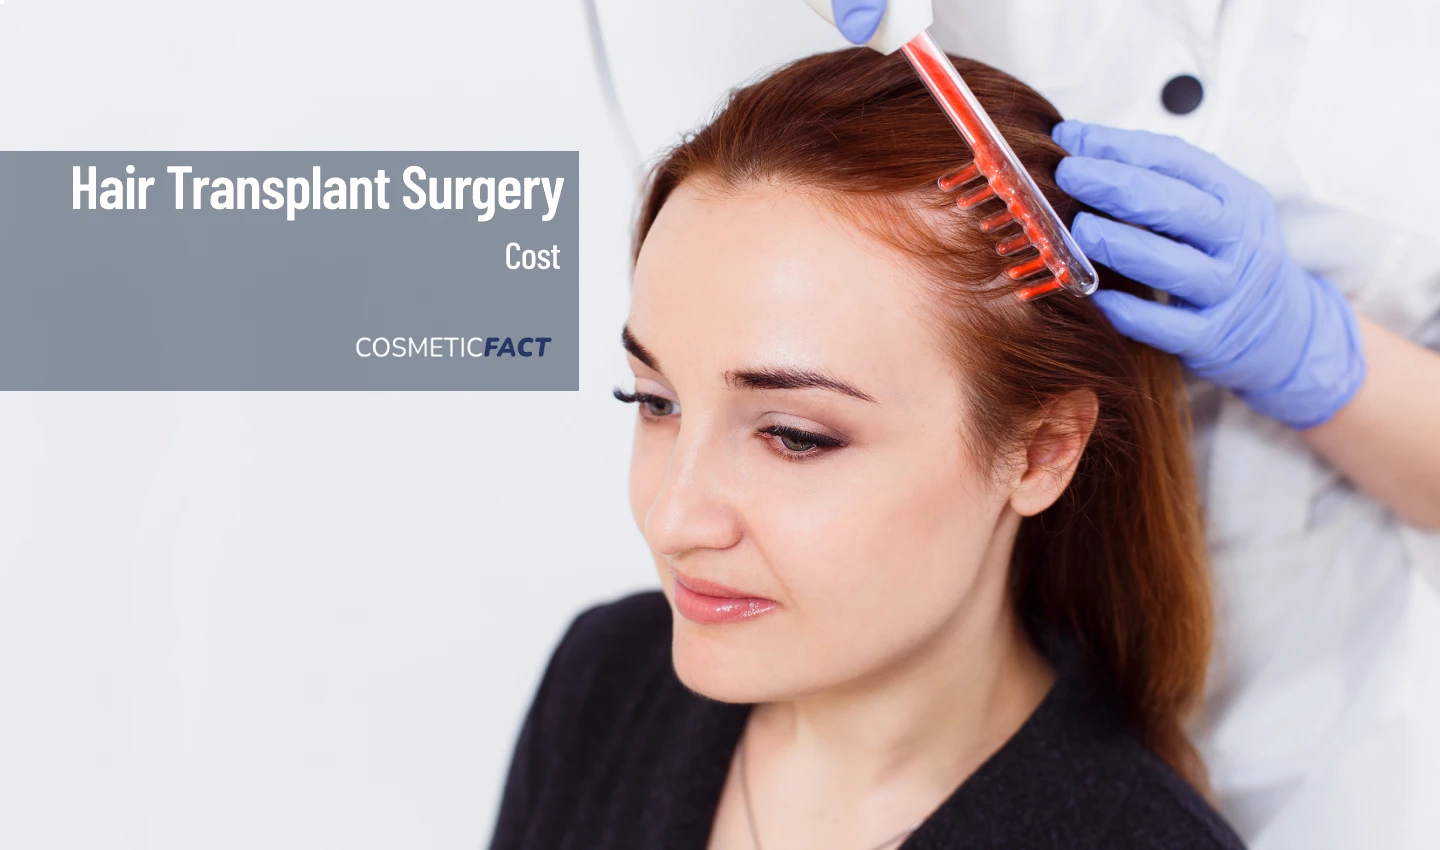 Patient receiving affordable hair restoration treatment, demonstrating cost-effective options for hair loss treatment.